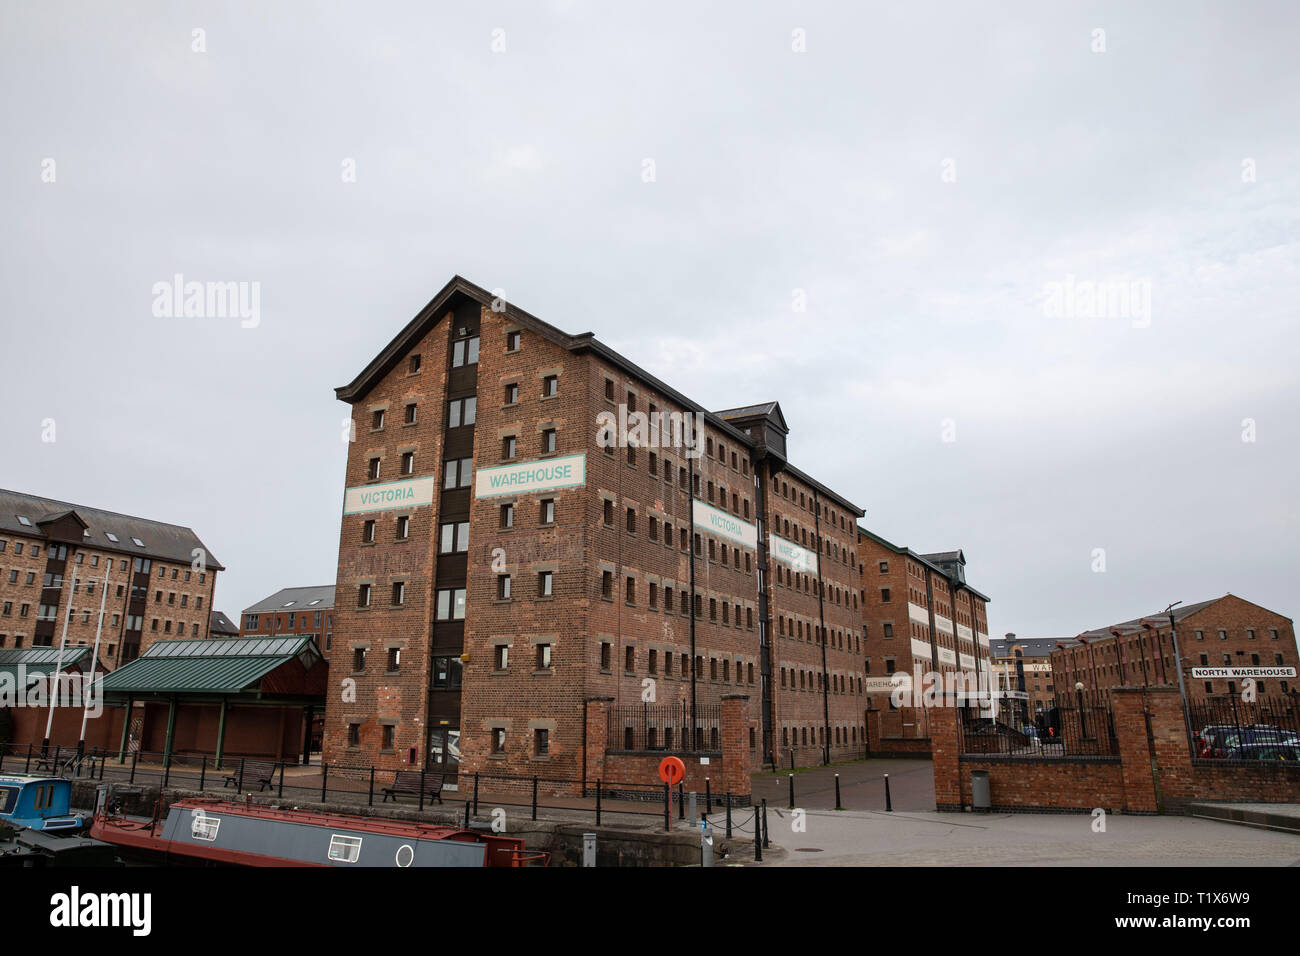 A general view of Victoria Warehouse at Gloucester Docks, Gloucester, England, UK, March 2019. Stock Photo